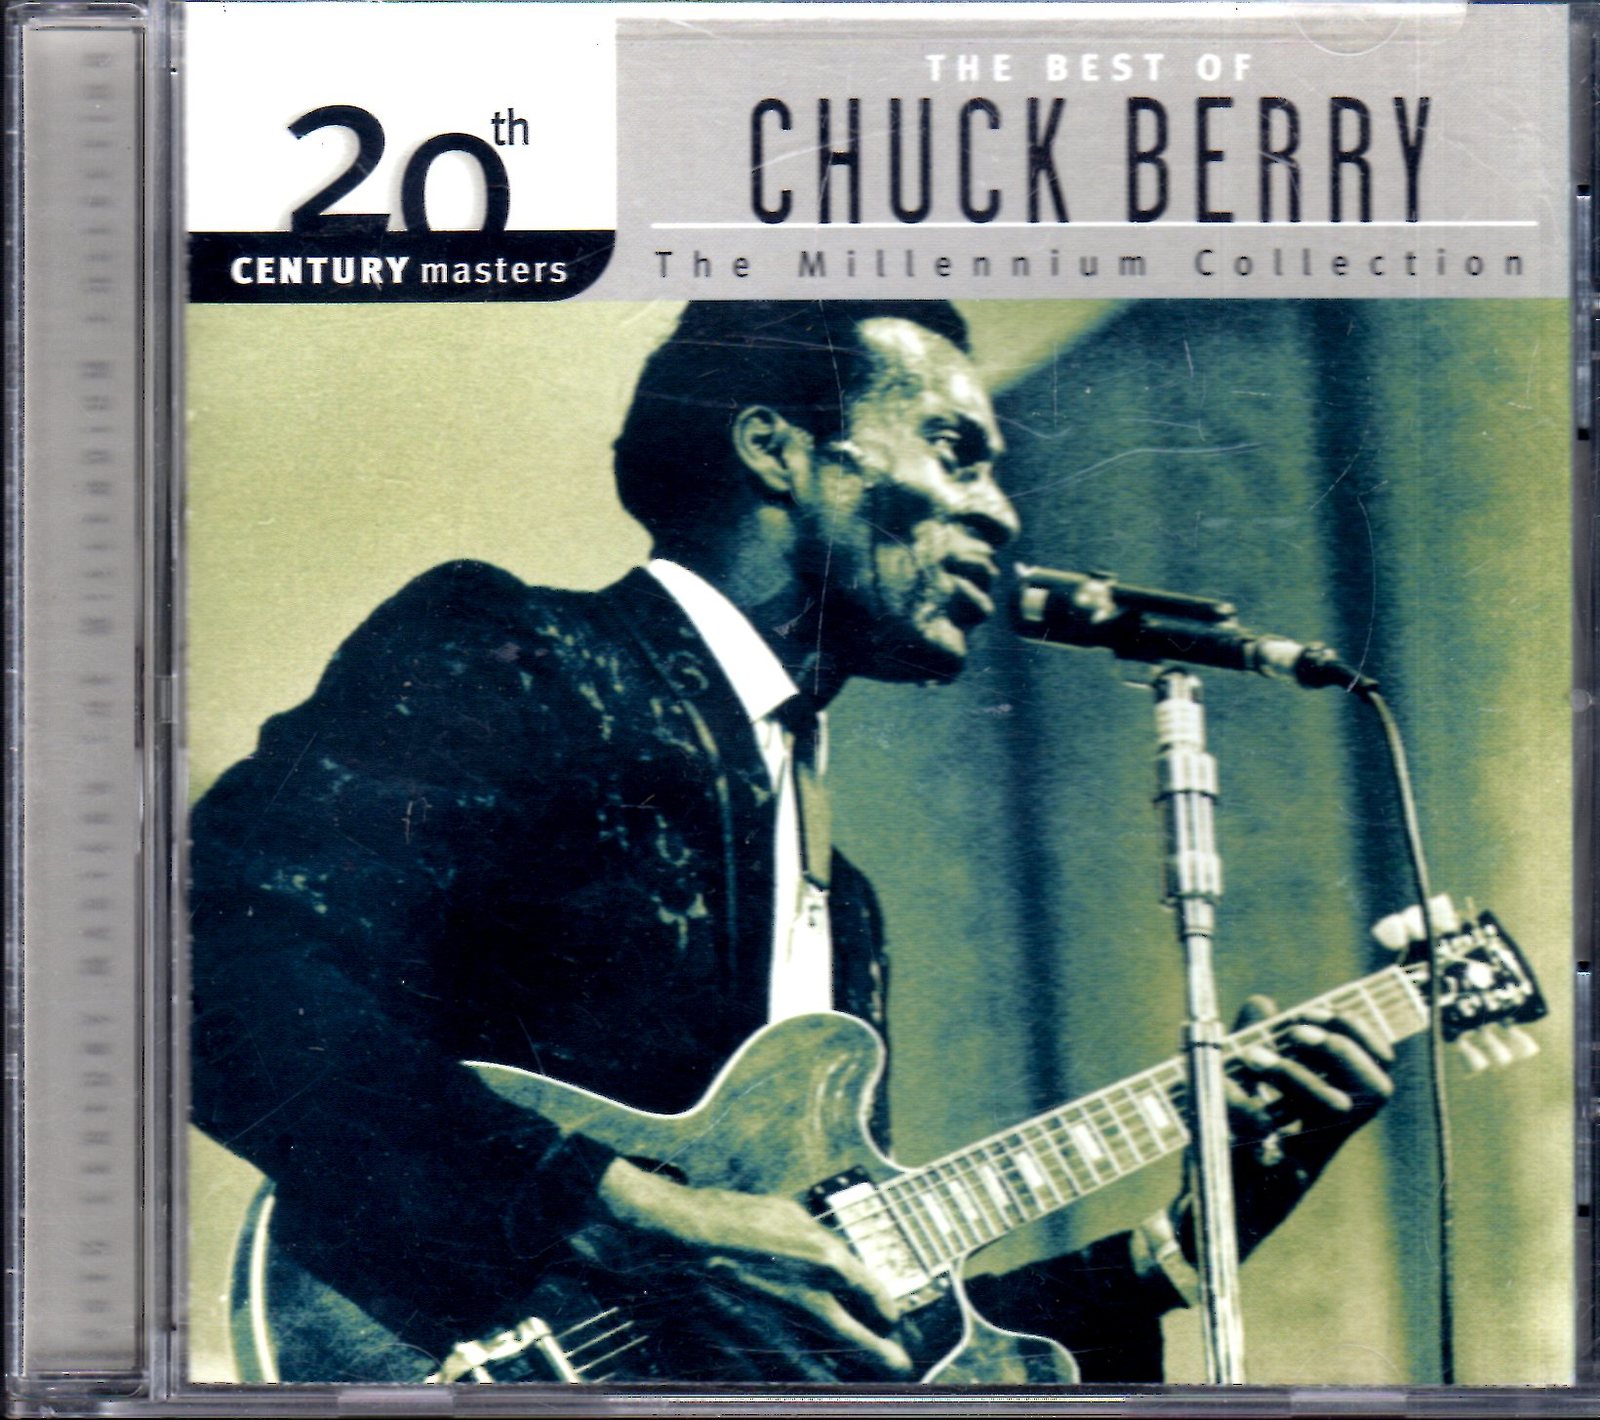 The Best Of Chuck Berry audio CD 20th Century Masters:The Millennium Collection - $5.90